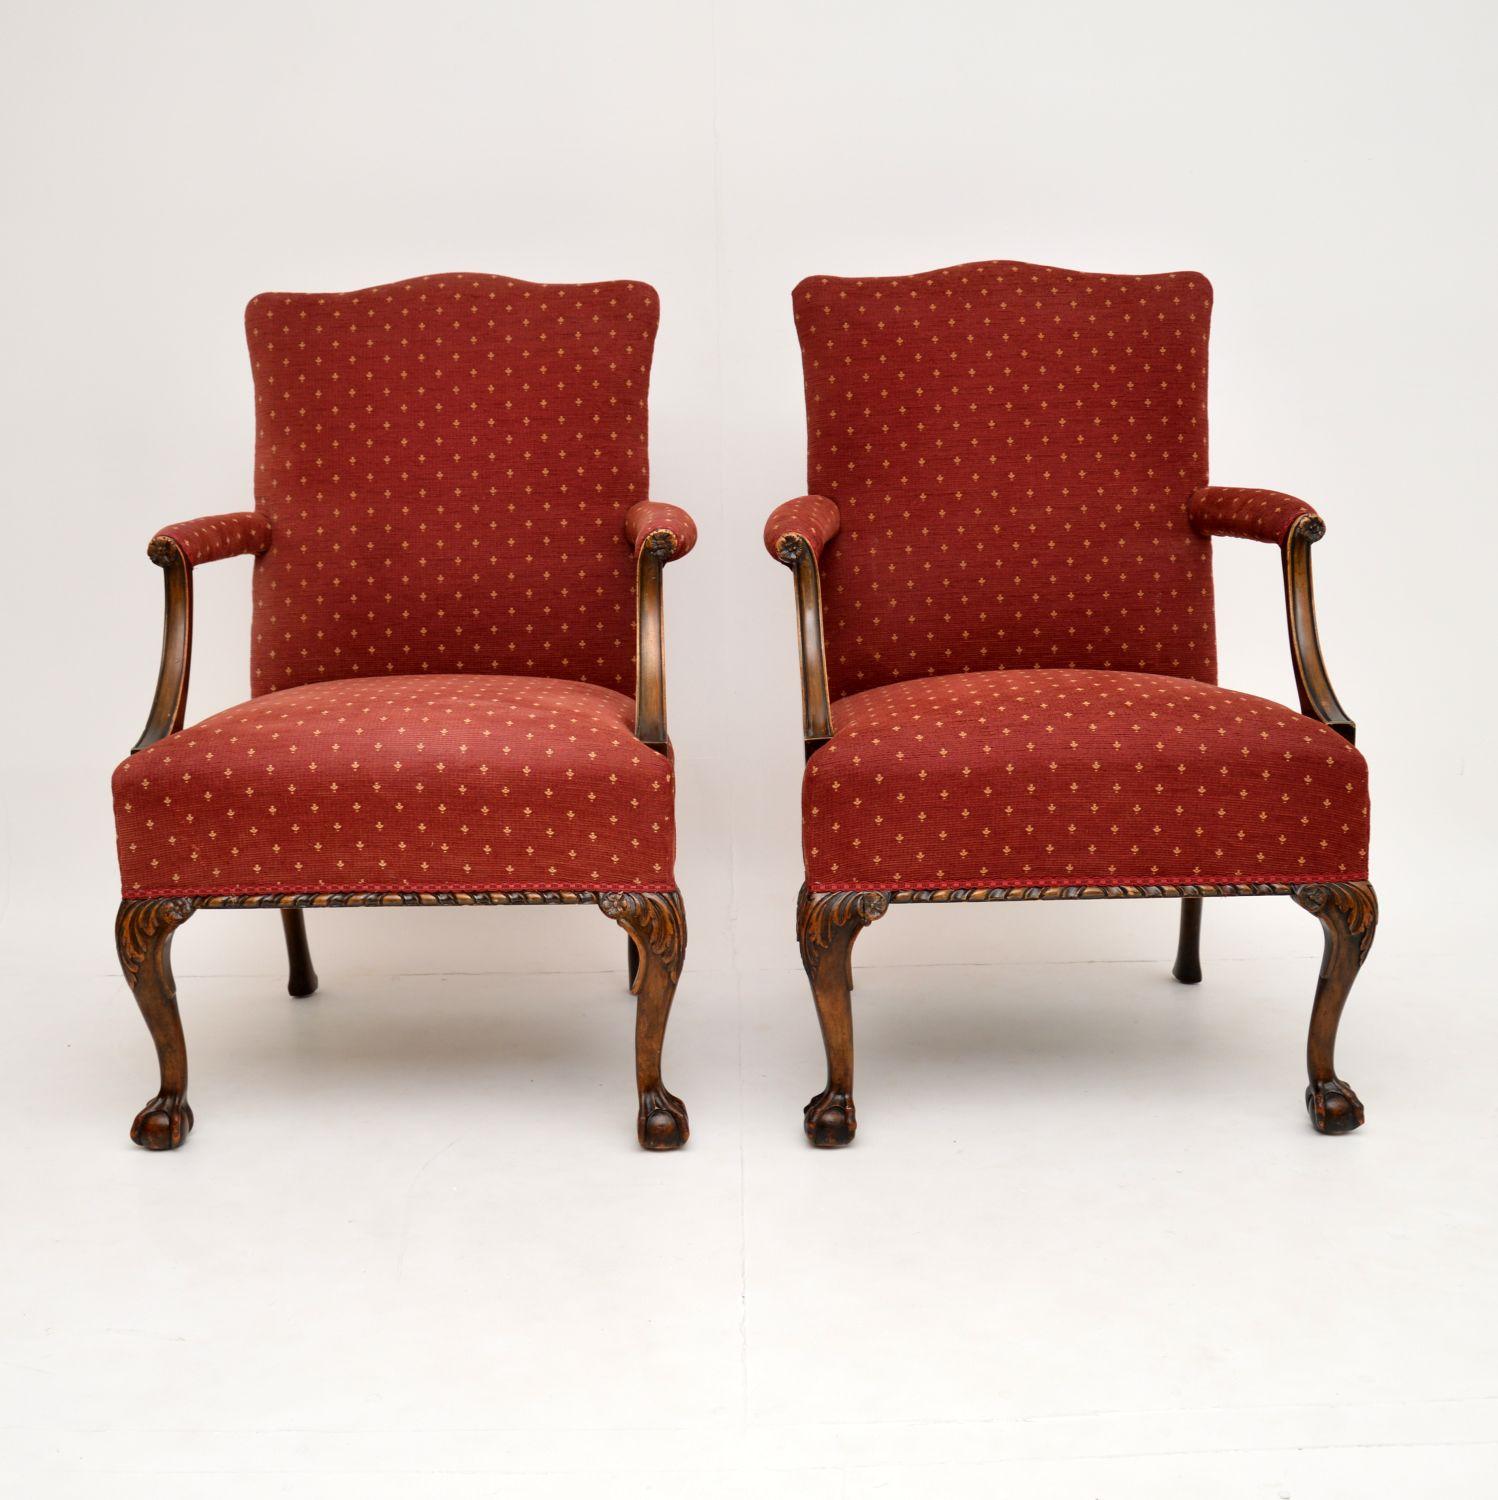 A smart and handsome pair of antique carved mahogany armchairs, in the Chippendale style. These date from circa 1890-1910 period.

They are of very fine quality, with lovely carving around the base and tops of the legs, plus they have ball & claw